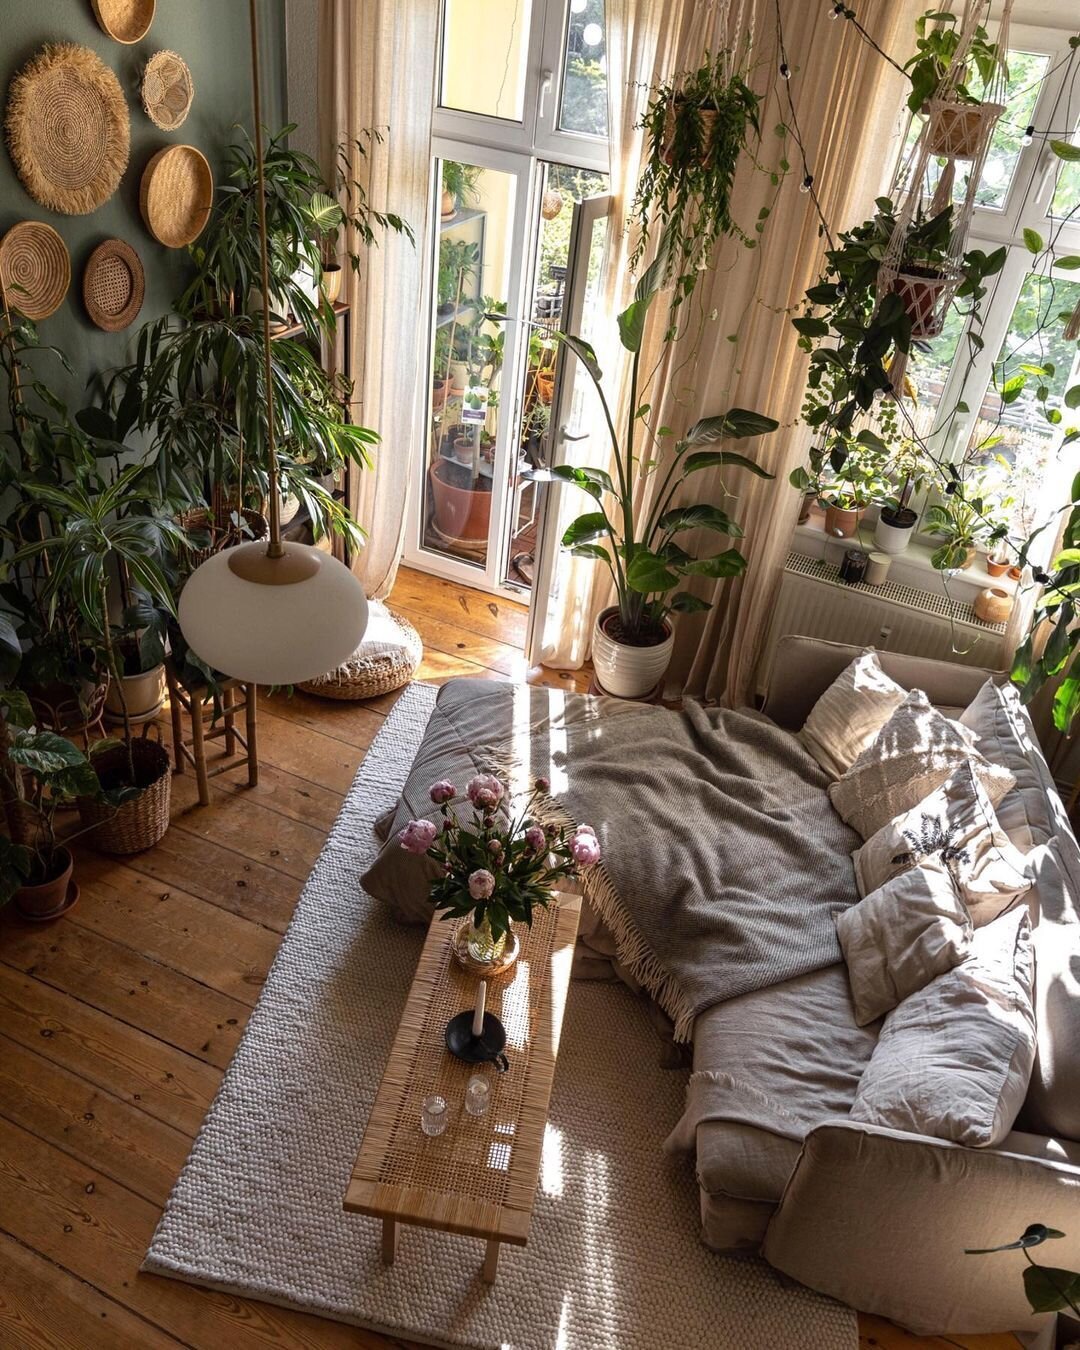 Join us on our brand new platform and get connected with your community. Check out the link in our bio.

🍃 We feature the best of #indoorplantsdecor 😍 ! Follow us for inspiration and to spread the love of beautiful Indoor Plant Decor 🌿
--
Featurin